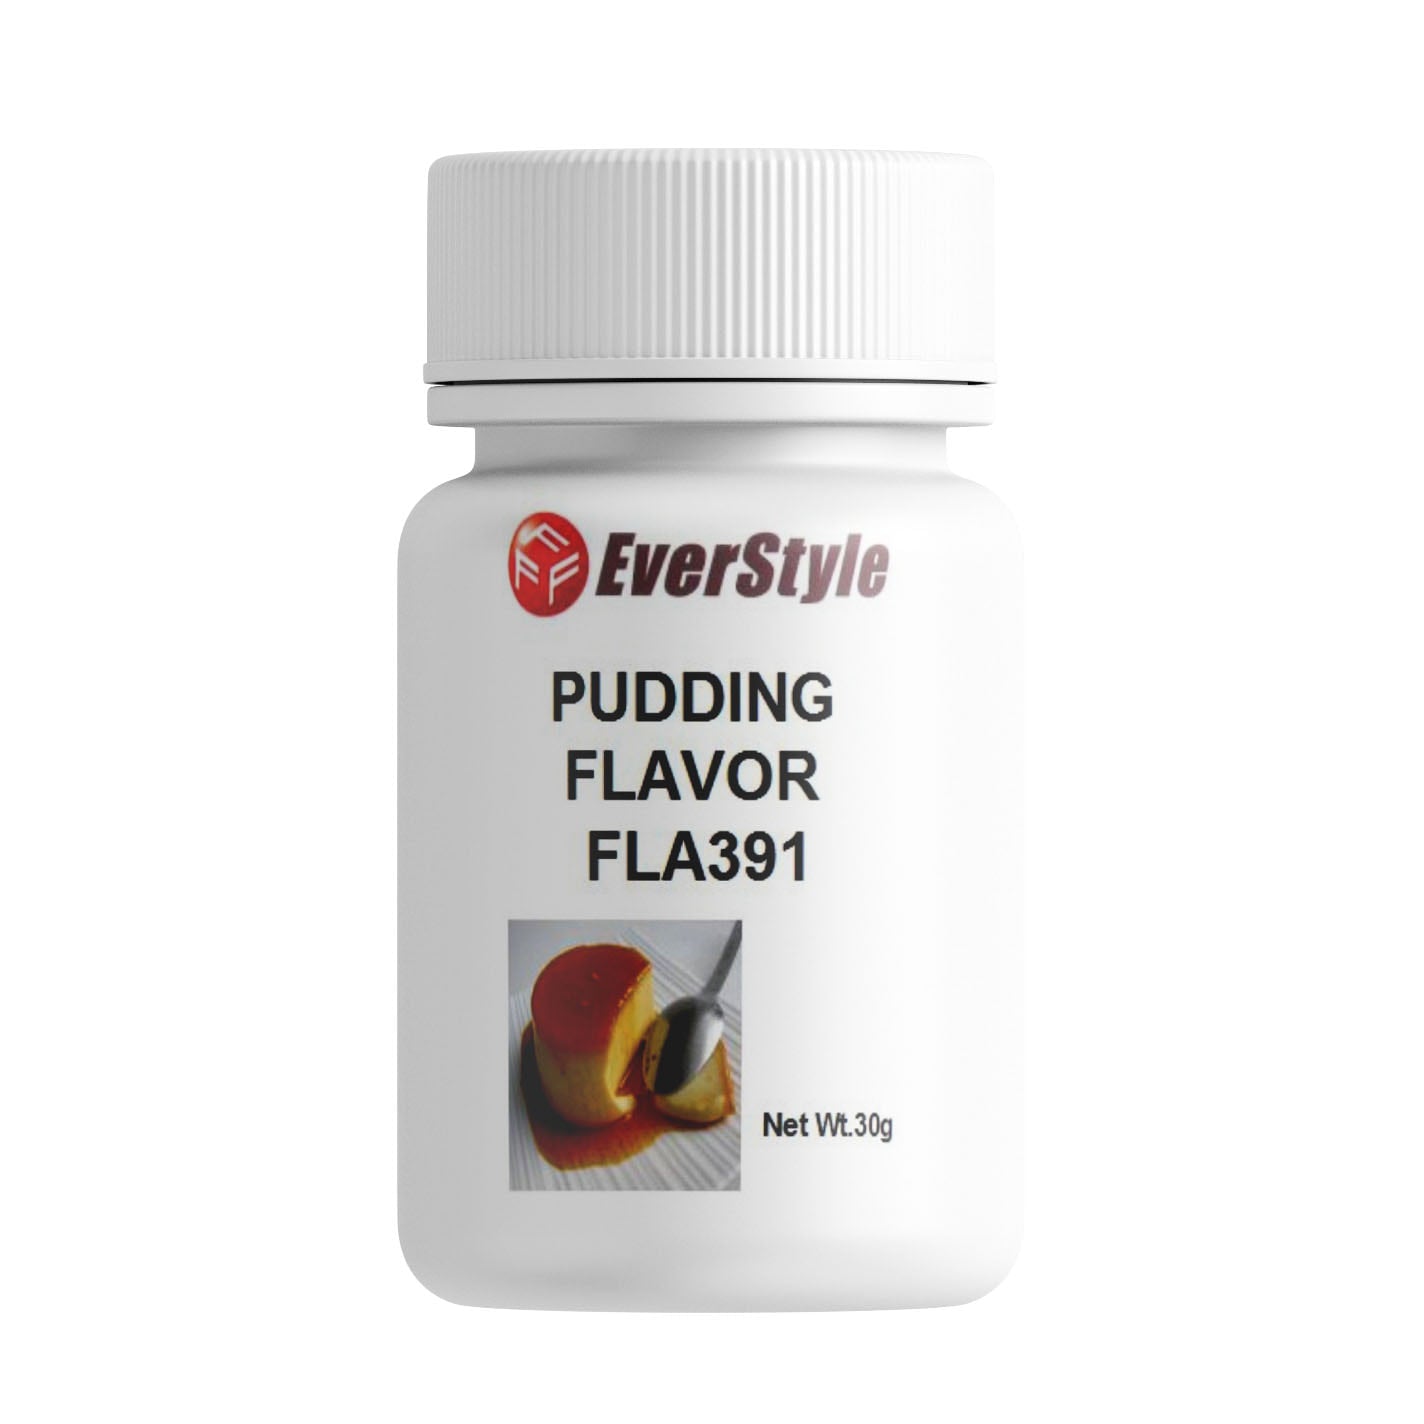 Everstyle Pudding Flavor 30g (FLA391)